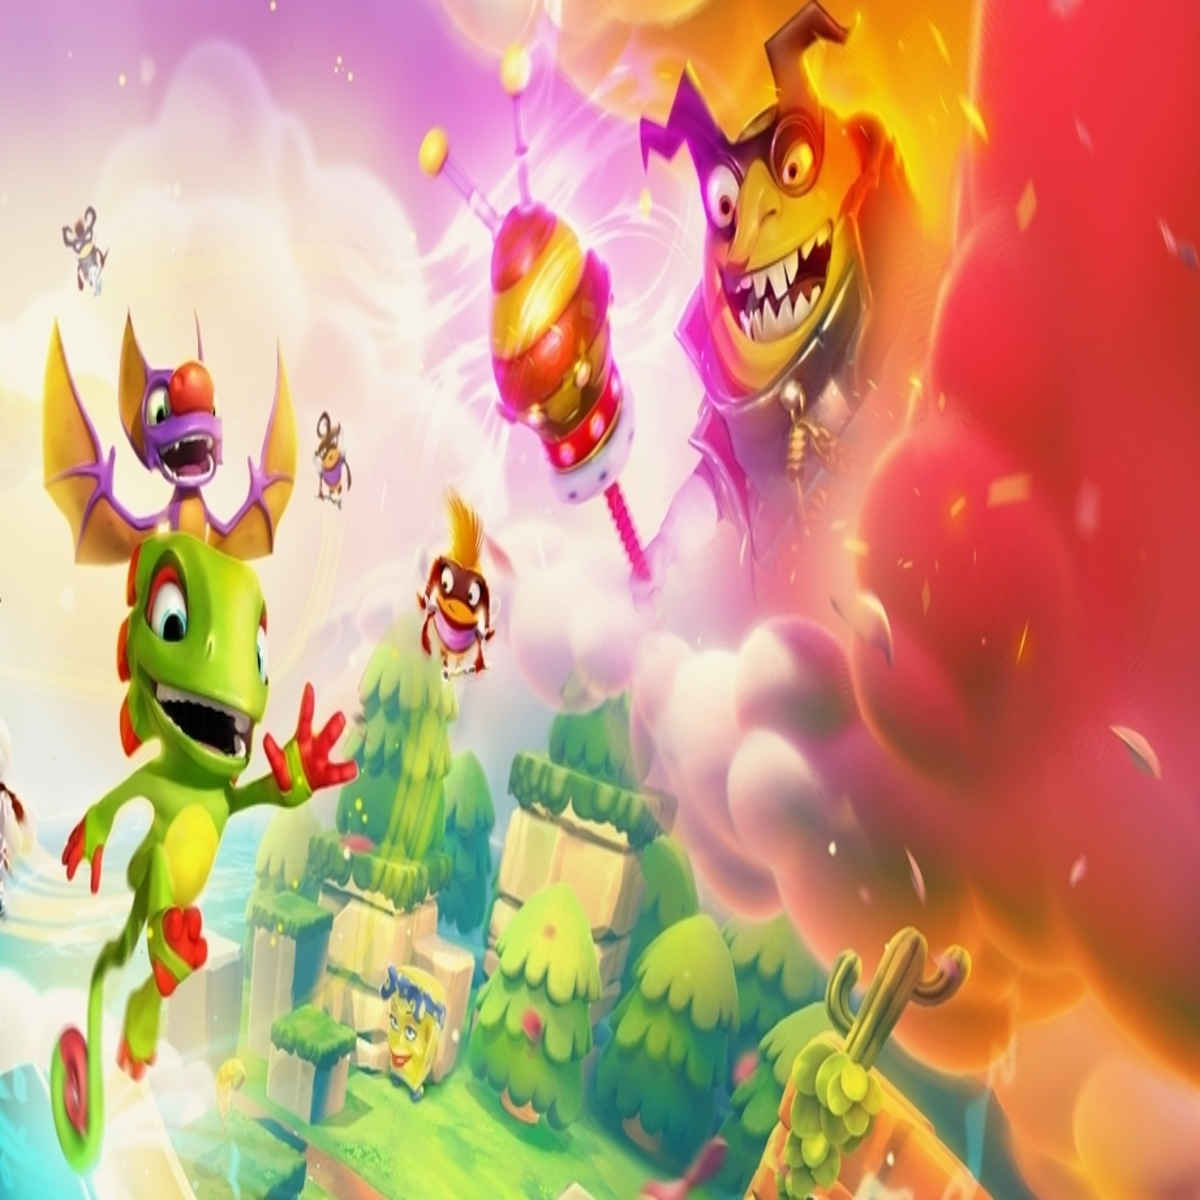 consoles month comes and PC and Impossible Yooka-Laylee next Lair to the